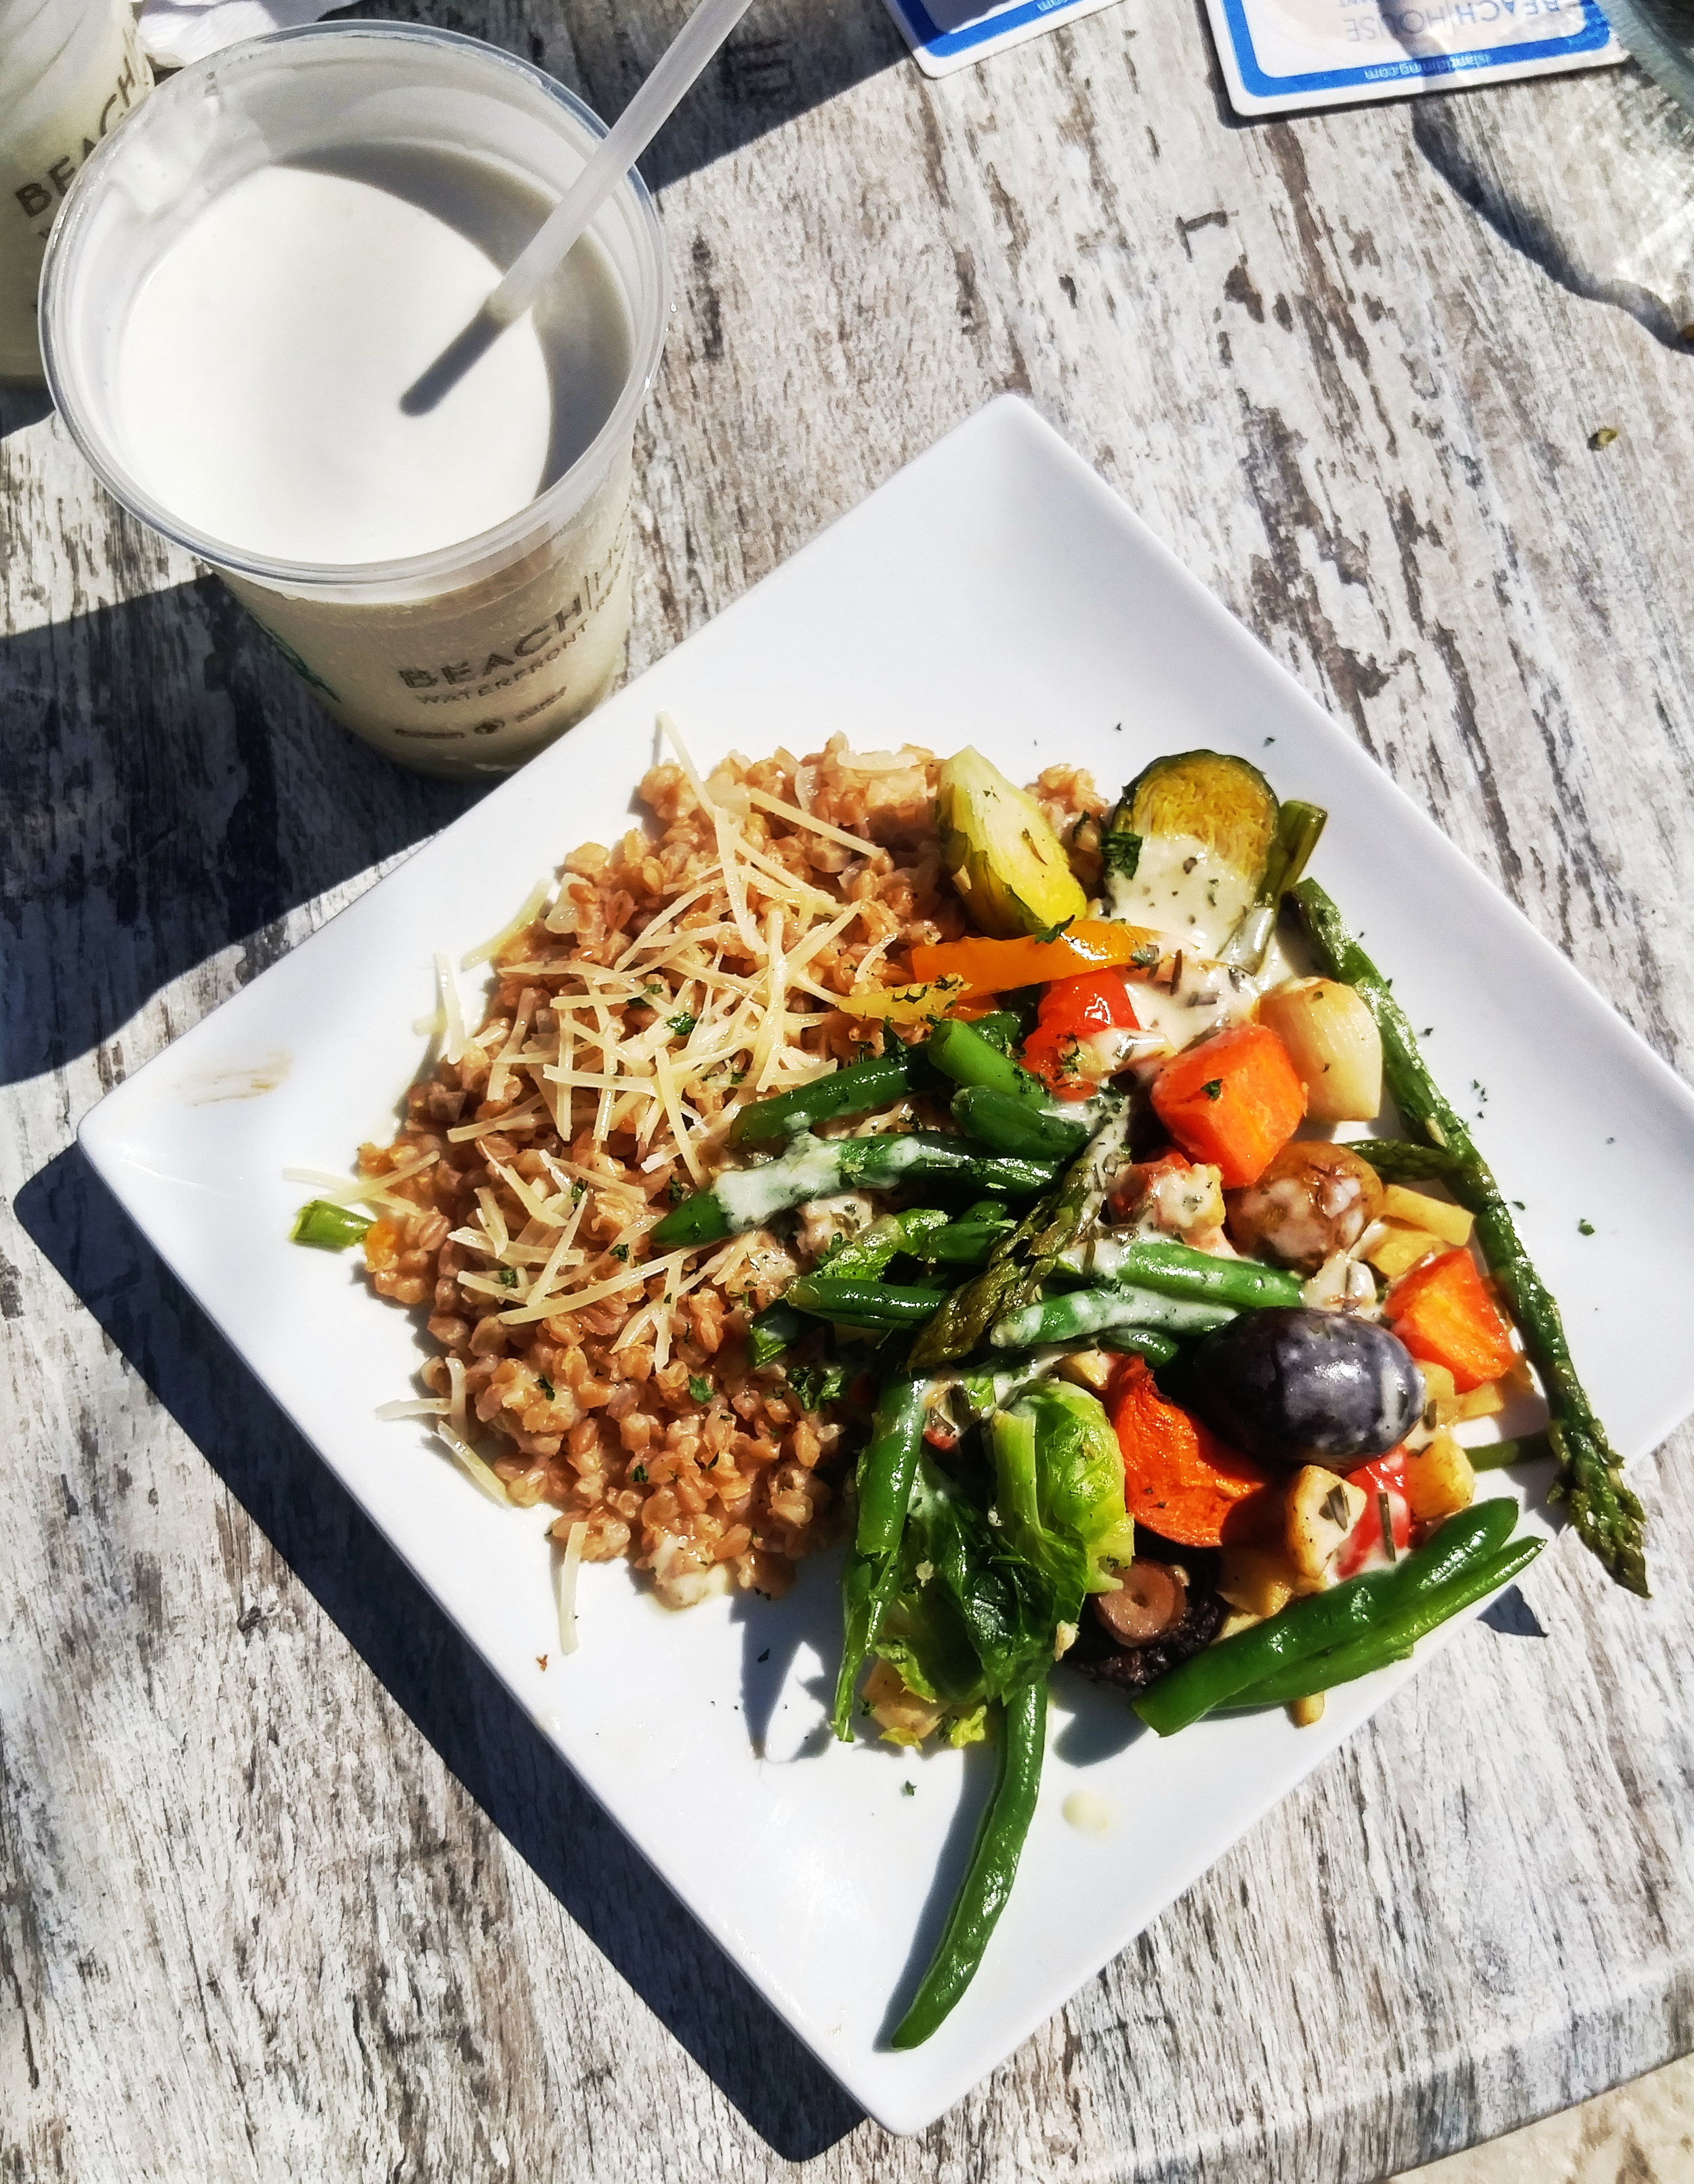 Healthy dish: Roasted veggies & Risotto